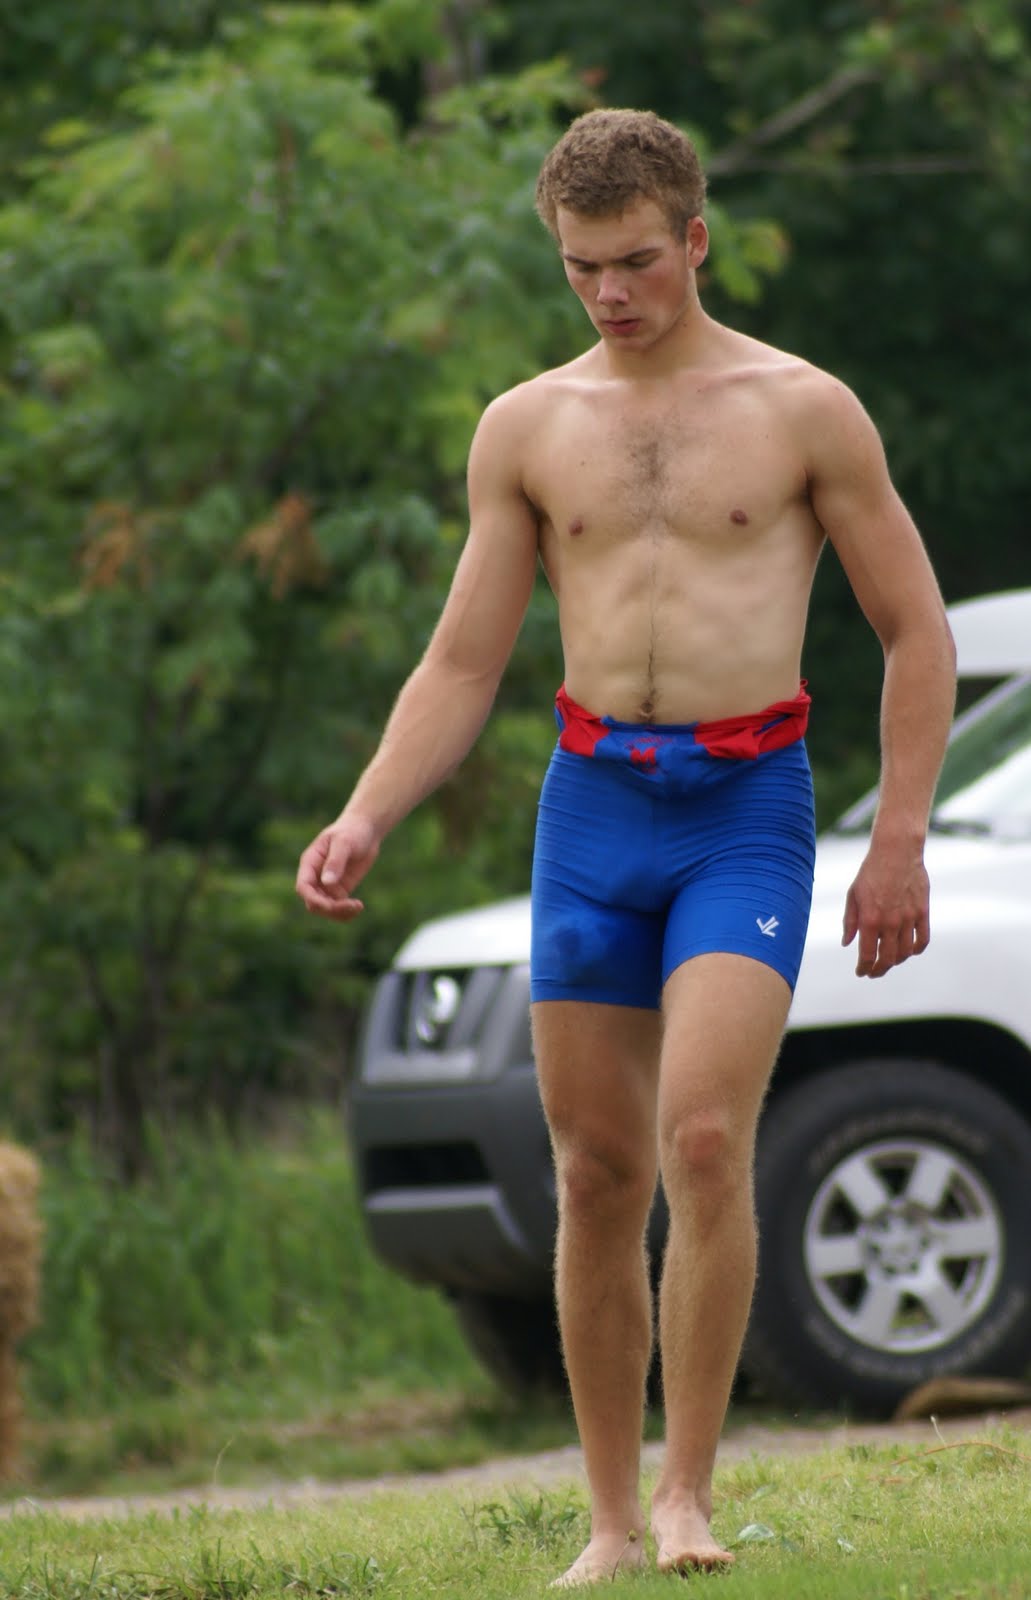 Hot Men Rowing!: Oh Baby its hot outside